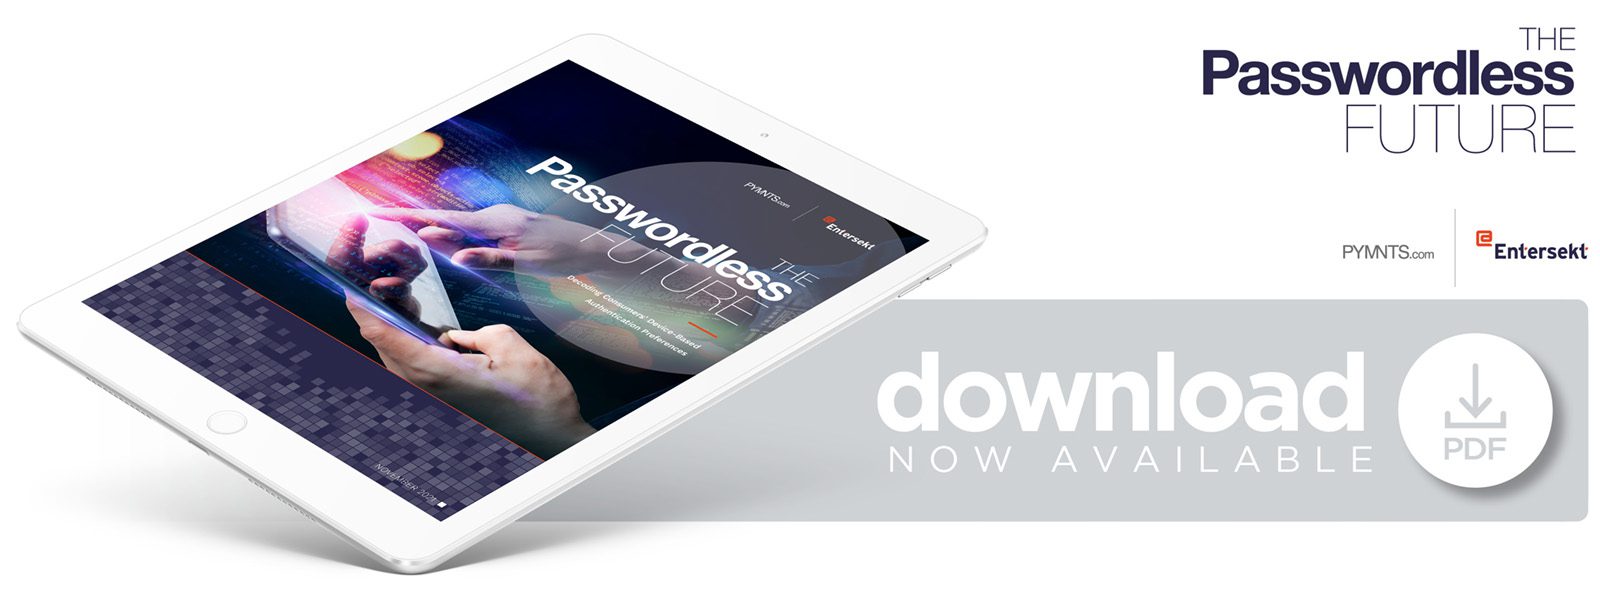 Download The Passwordless Future: Decoding Consumers' Device-Based Authentication Preferences to learn more on what consumers want regarding digital authentication processes